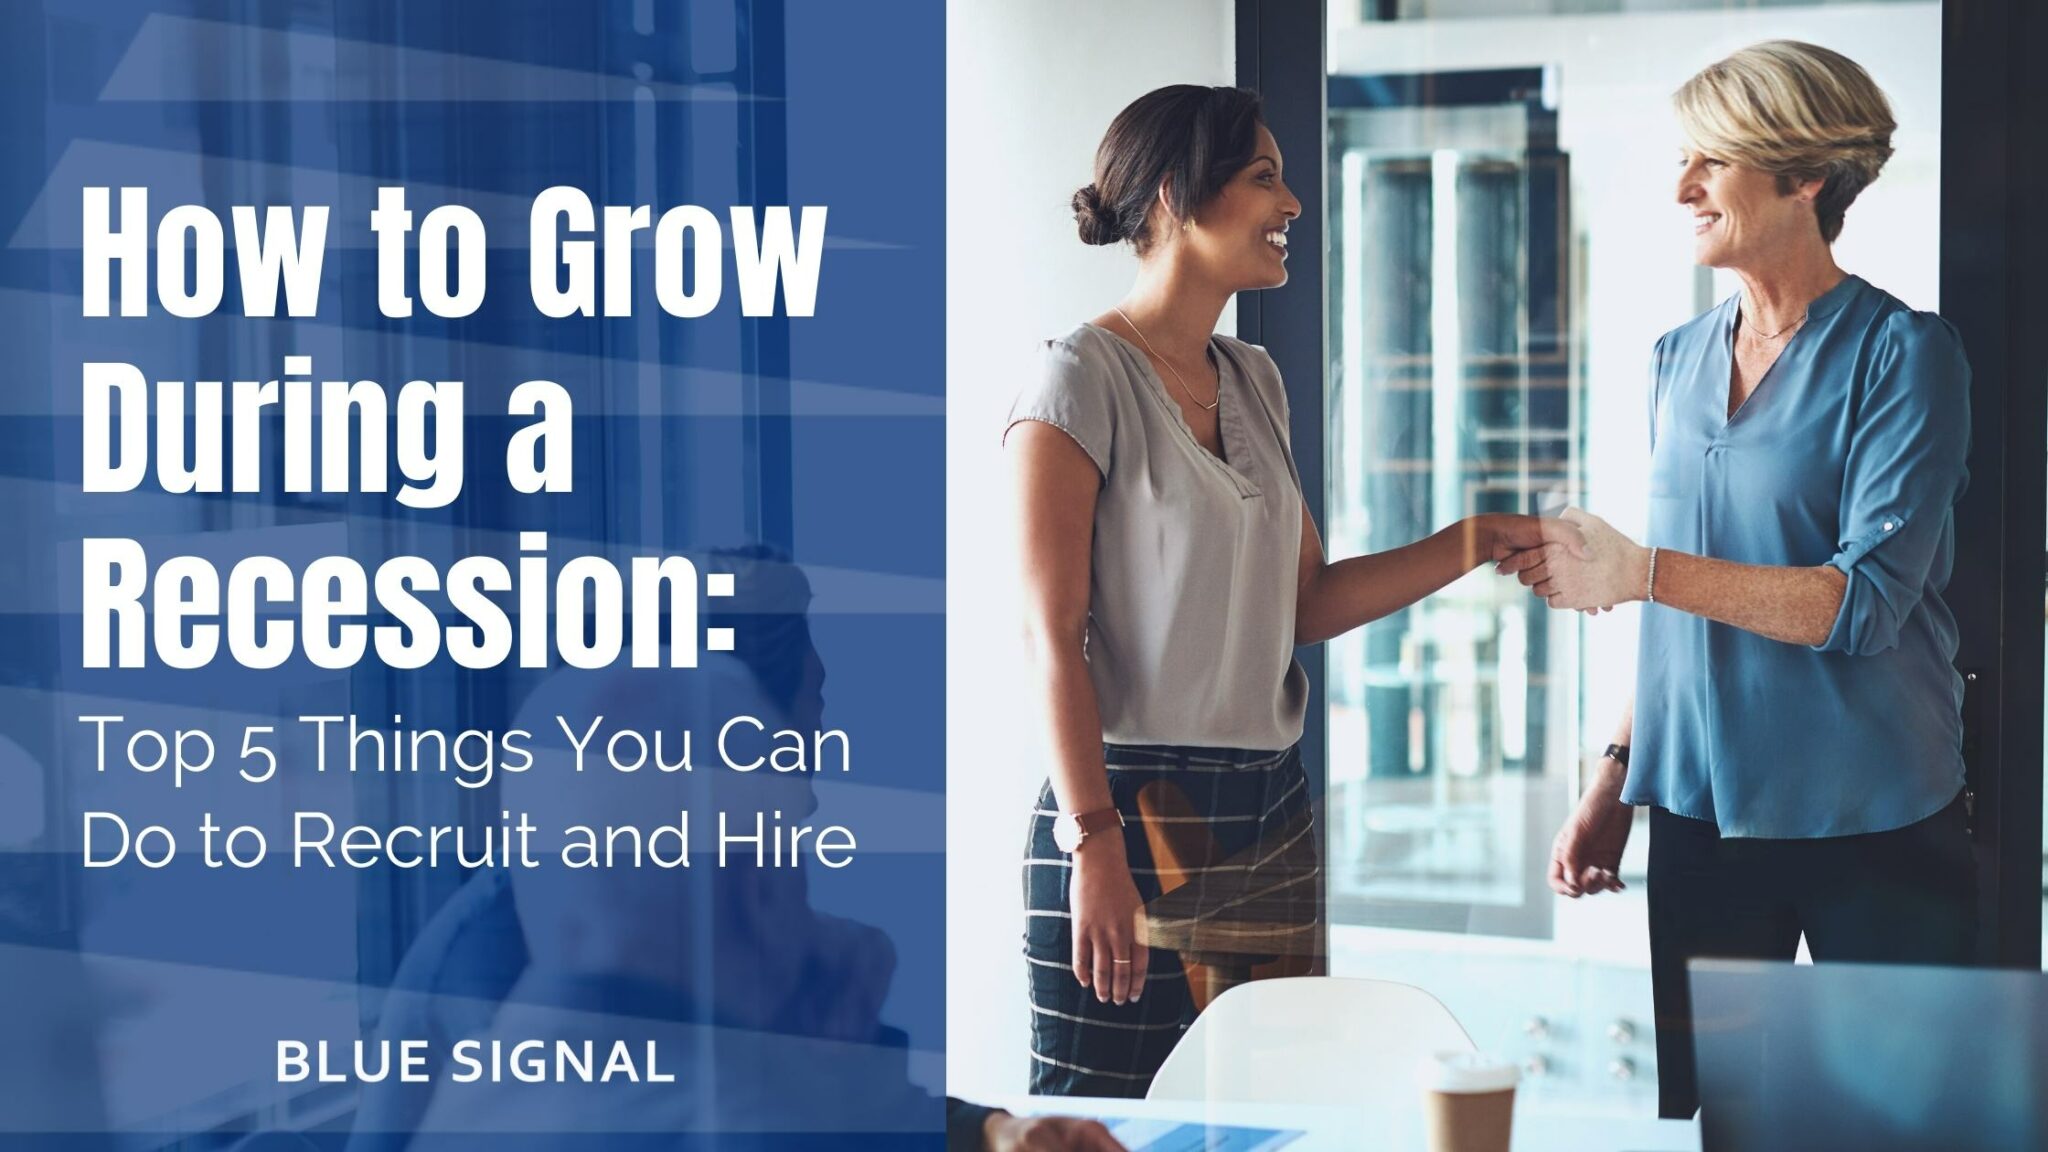 The text "How to Grow During A Recession: Top 5 Things You Can Do to Recruit and Hire" overlayed on an image of 2 women shaking hands in an office setting.